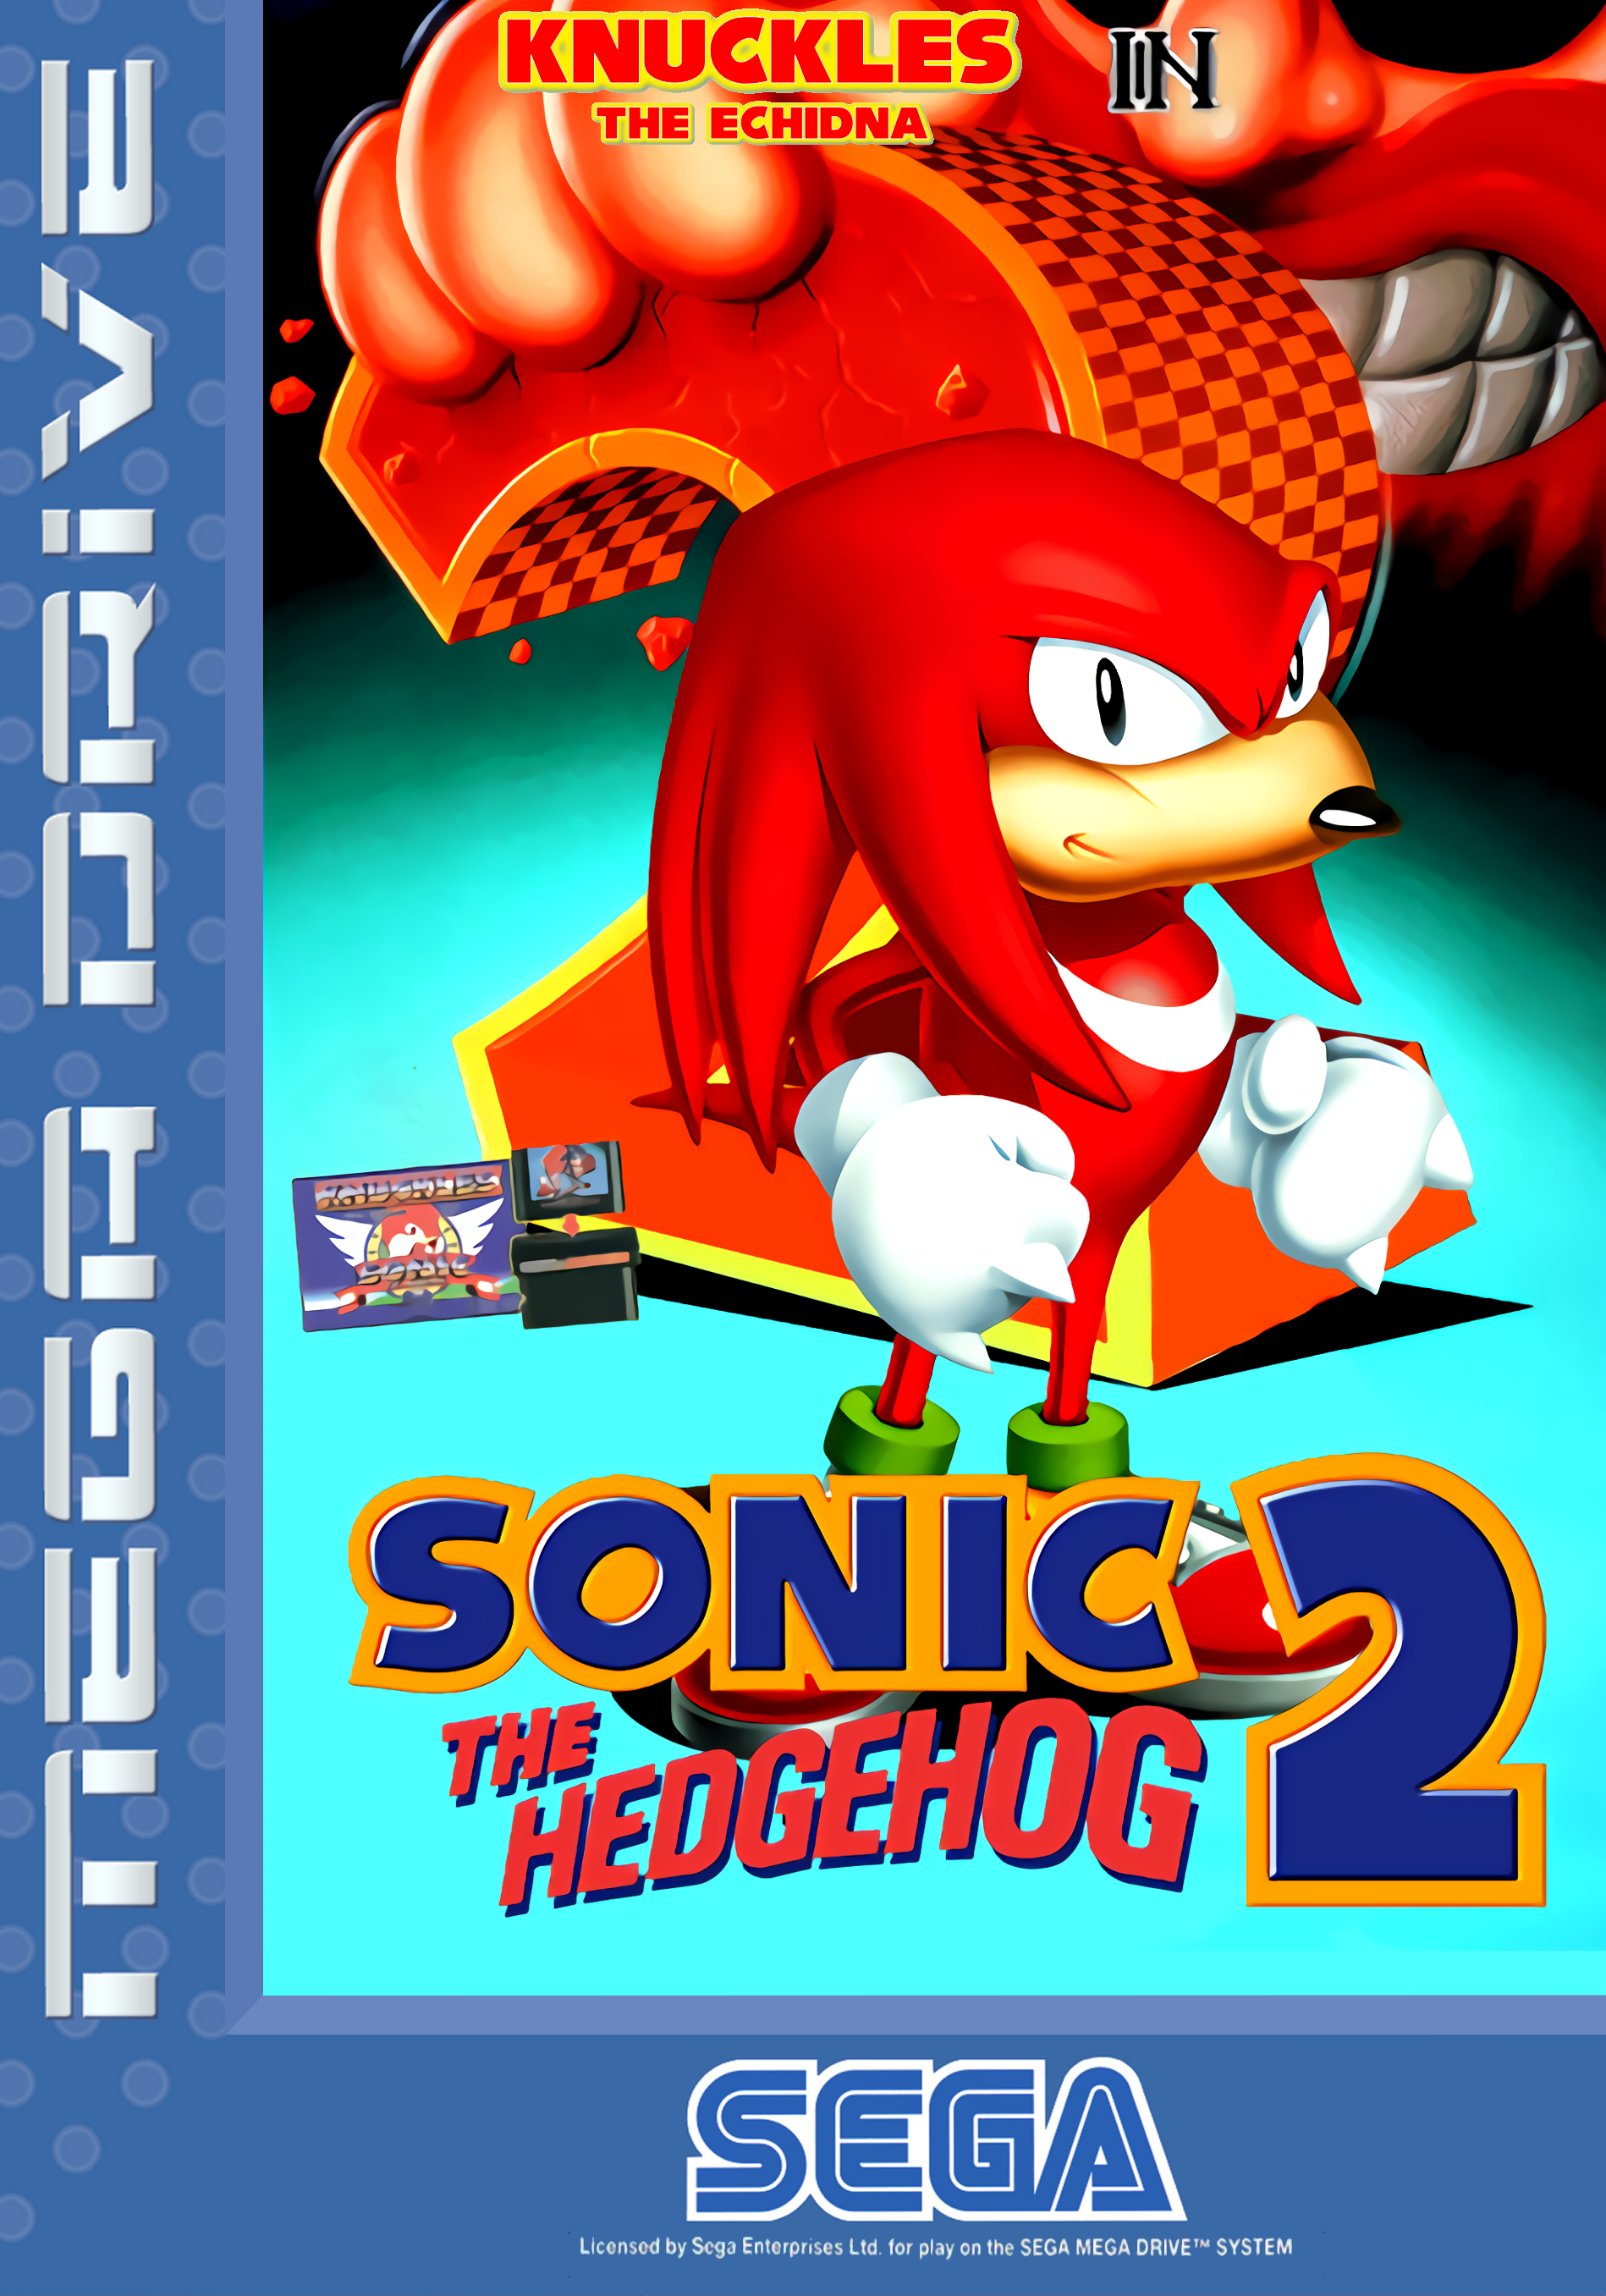 Sonic & Knuckles + Sonic the Hedgehog 2 Details - LaunchBox Games Database